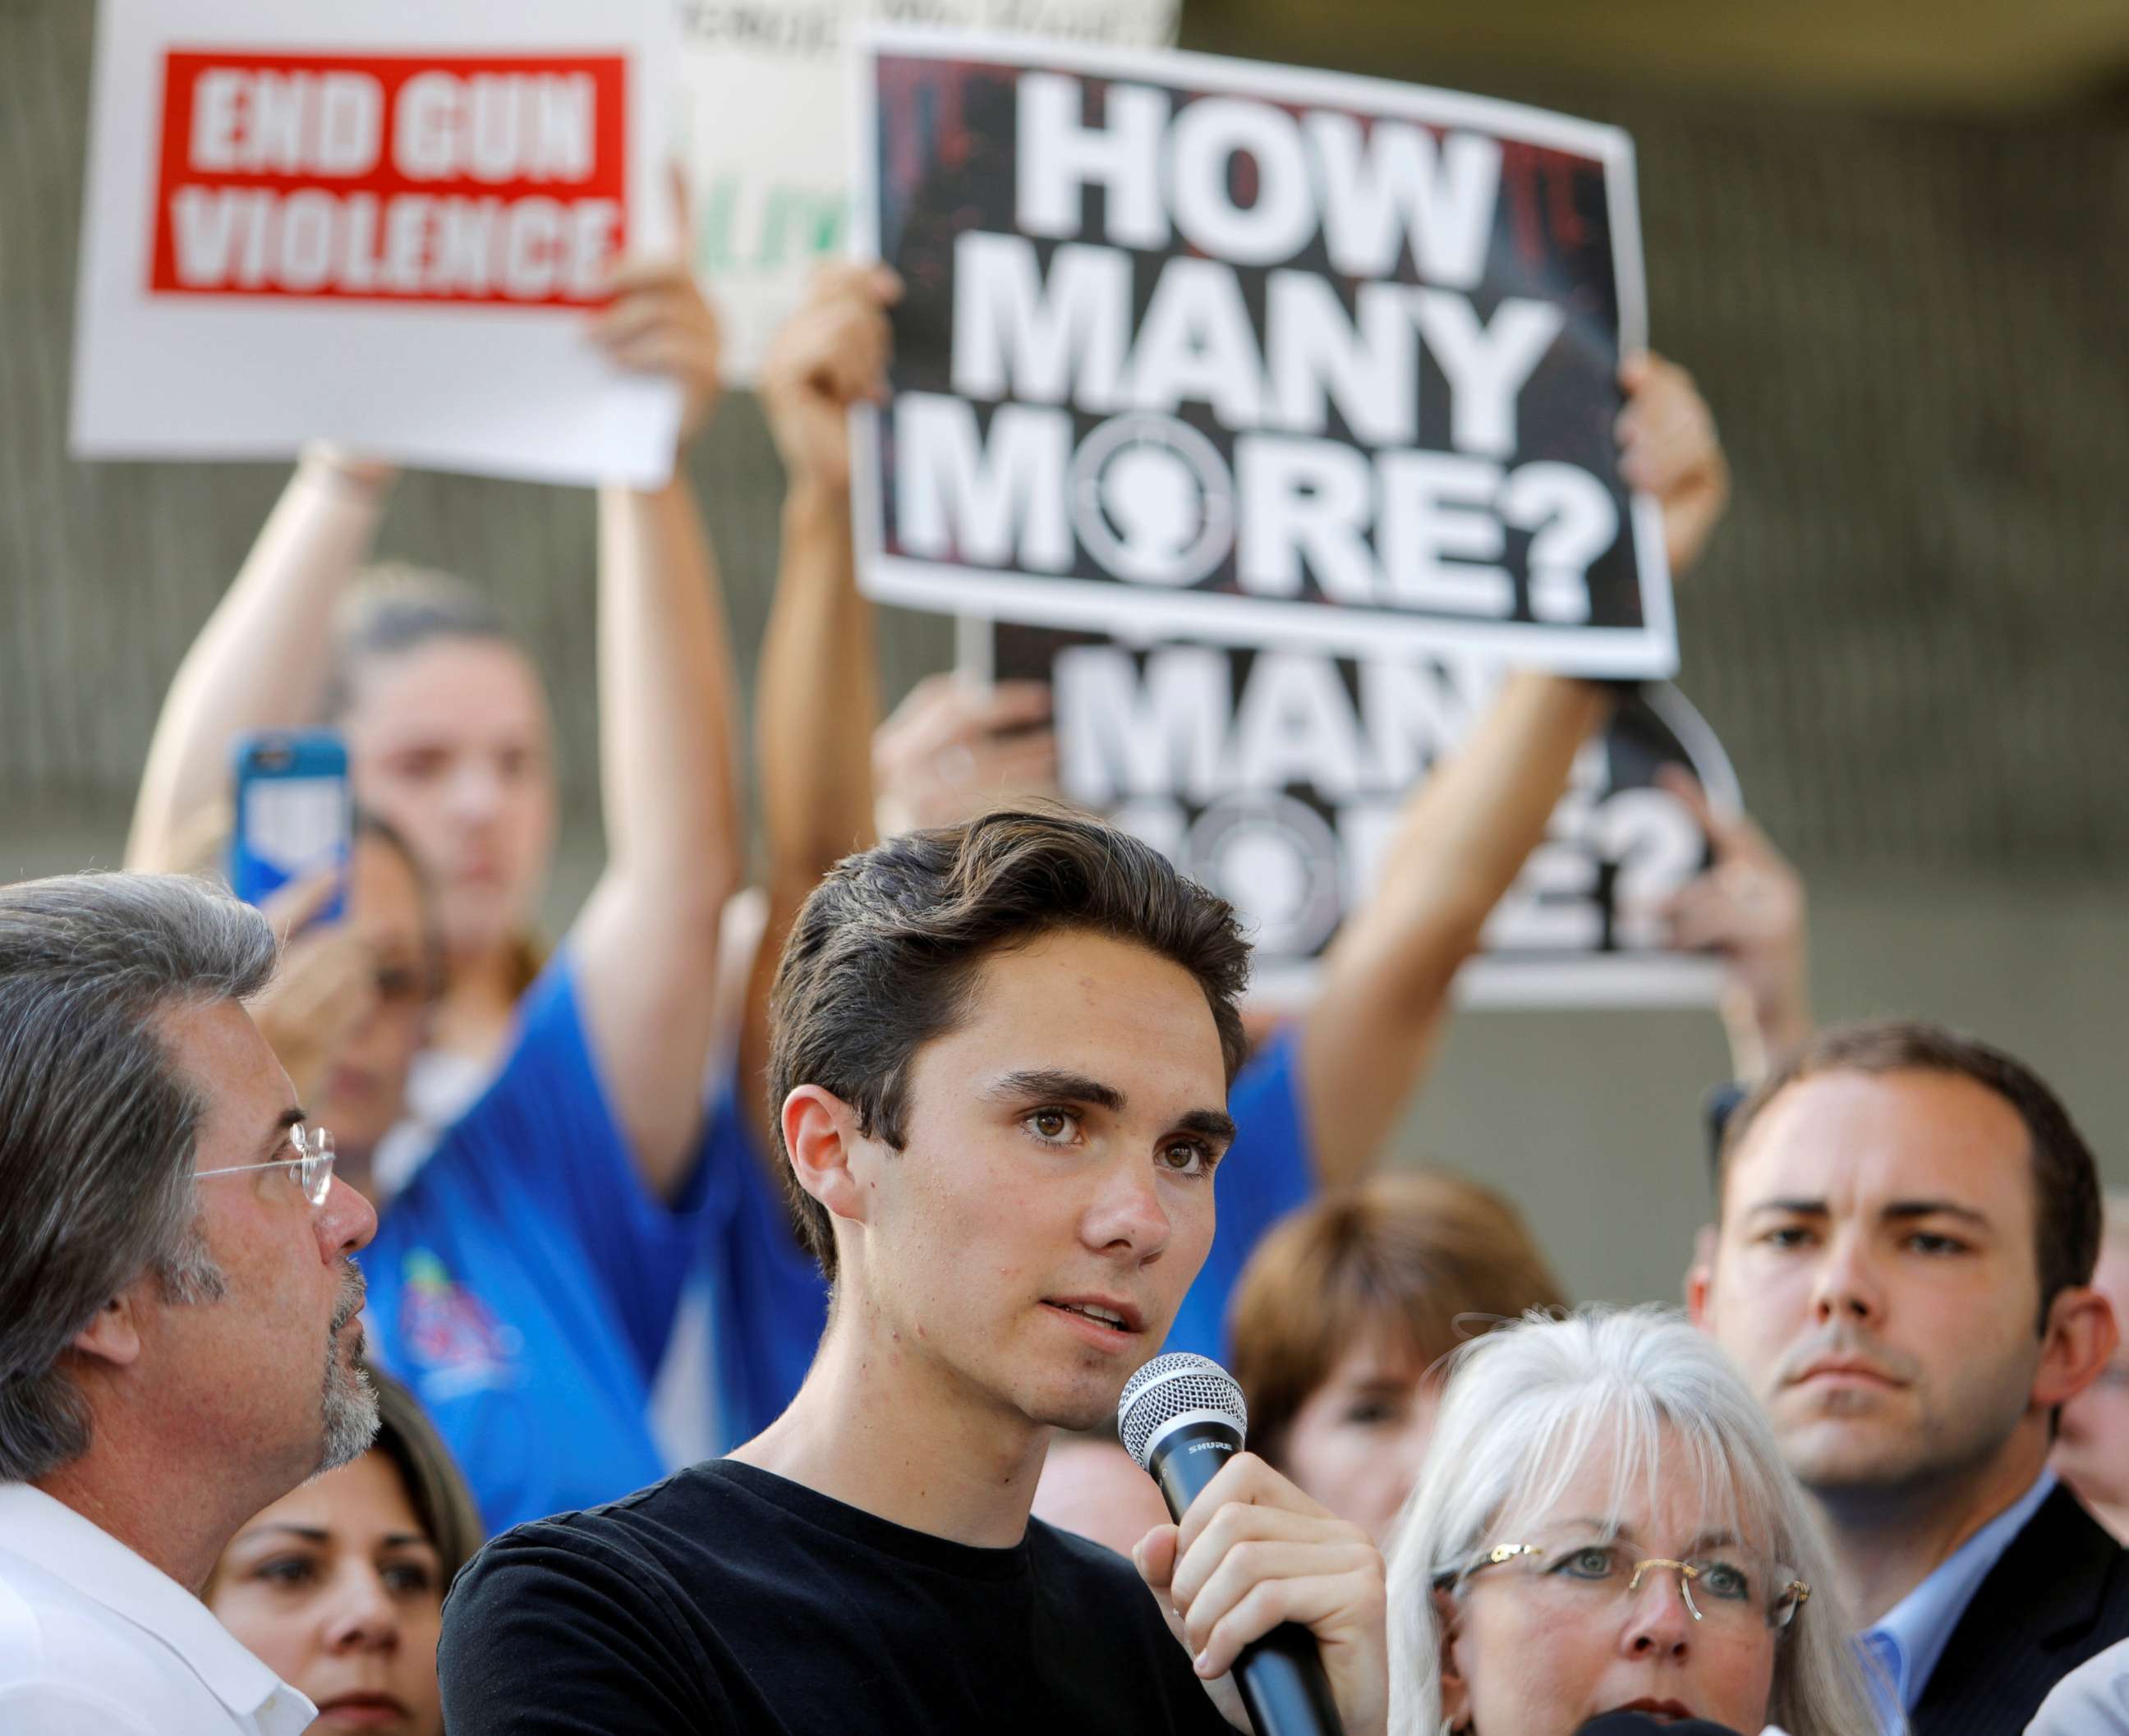 PHOTO: David Hogg, a senior at Marjory Stoneman Douglas High School, speaks at a rally calling for more gun control three days after the shooting at his school, in Fort Lauderdale, Fla., Feb. 17, 2018.